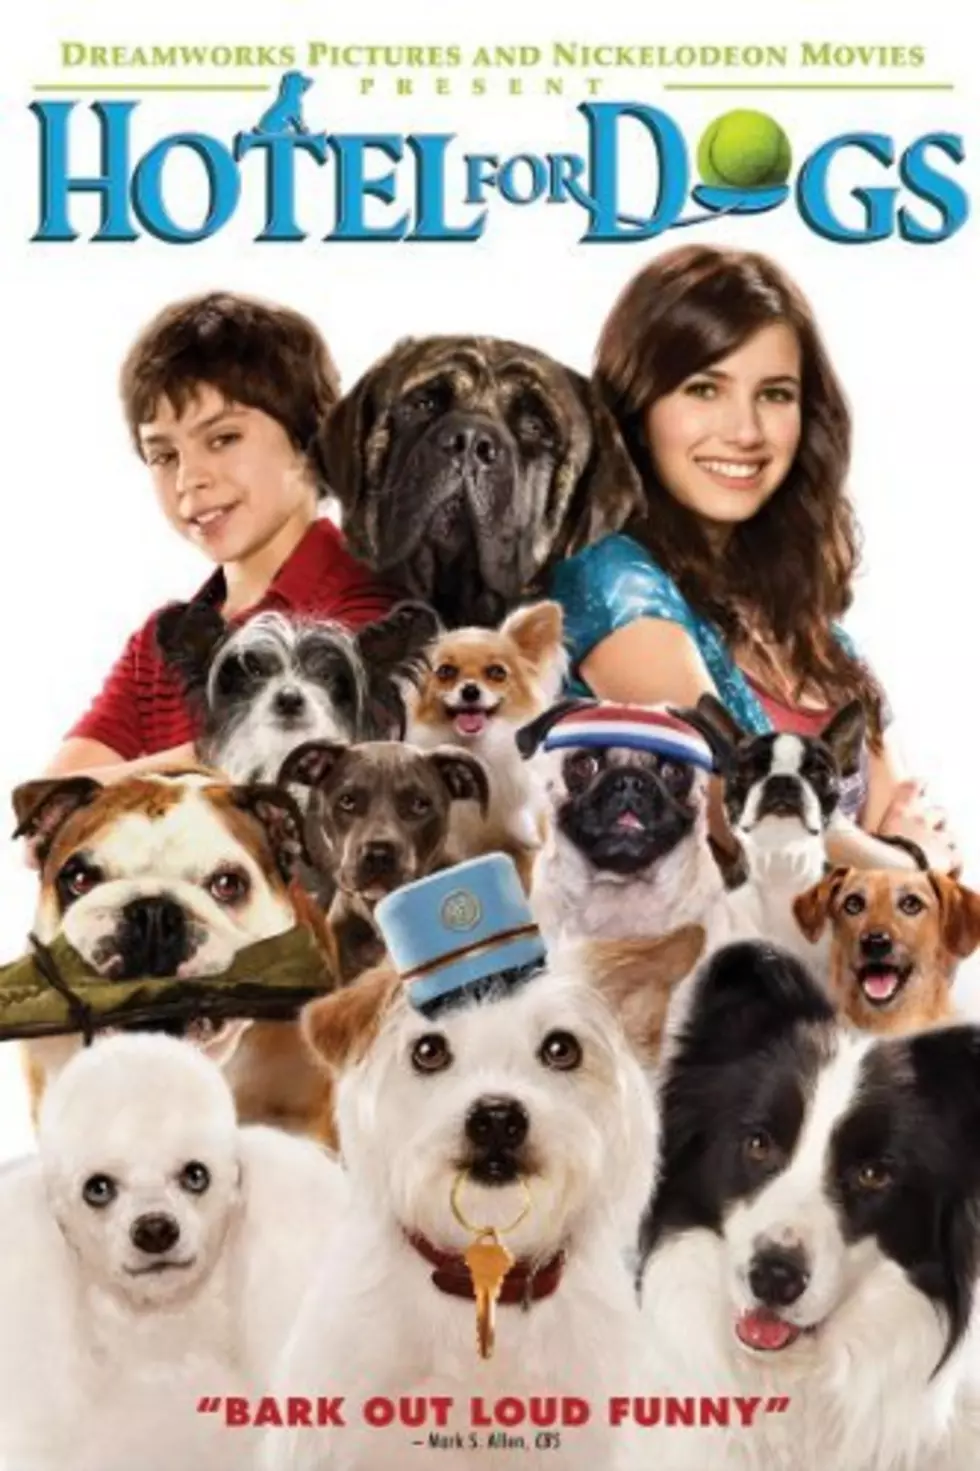 This Friday Night&#8217;s FREE Downtown Movie is &#8220;Hotel For Dogs&#8221;